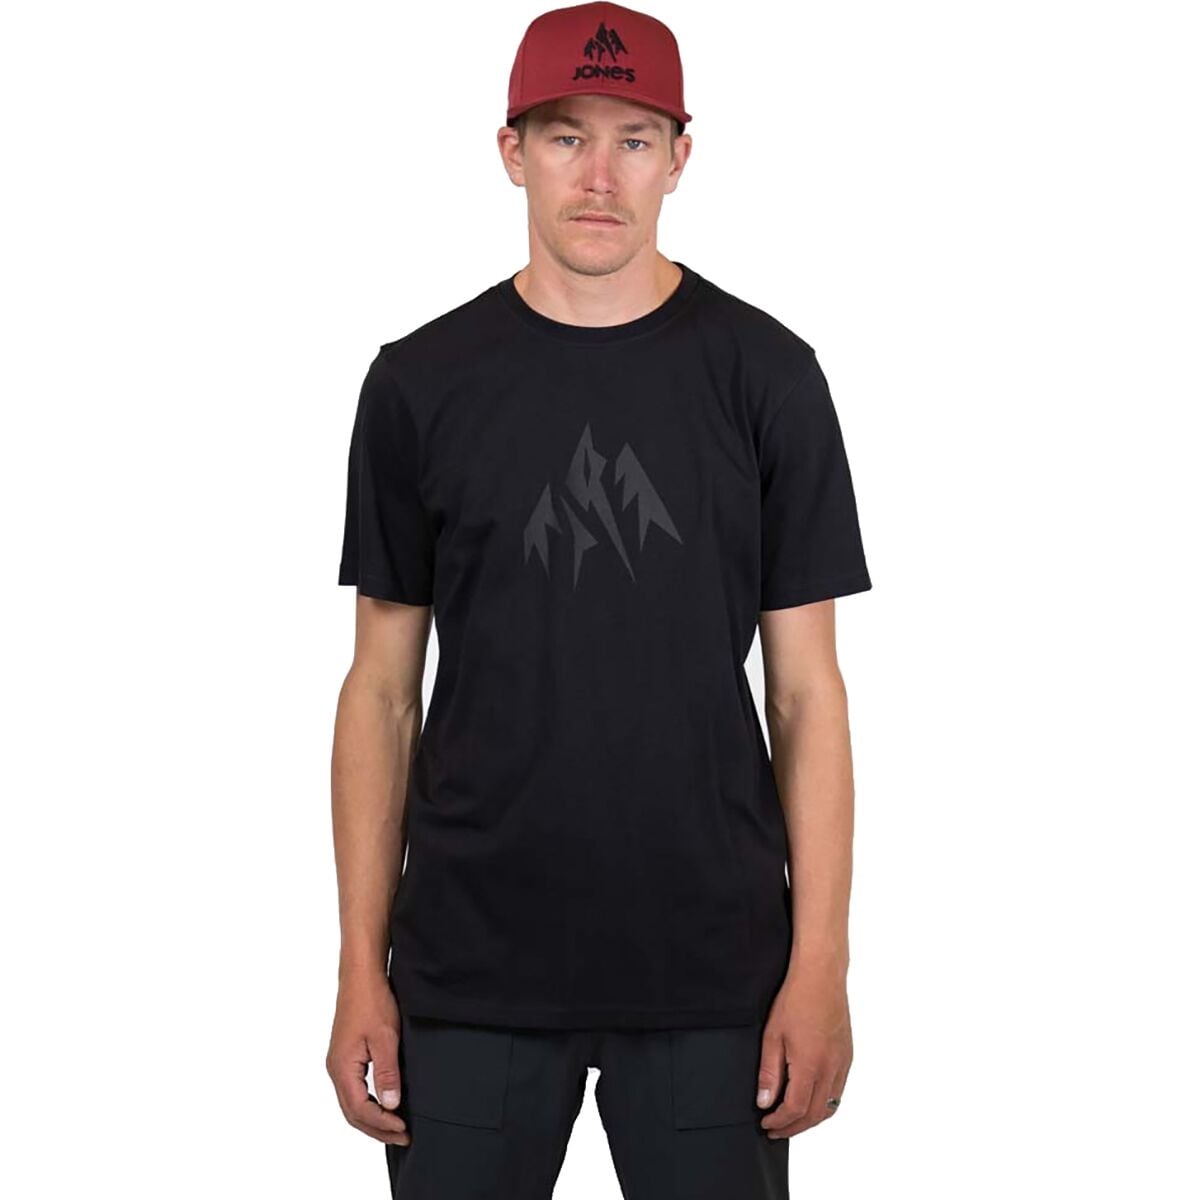 Snowboards Mountain Journey T-Shirt - - Clothing